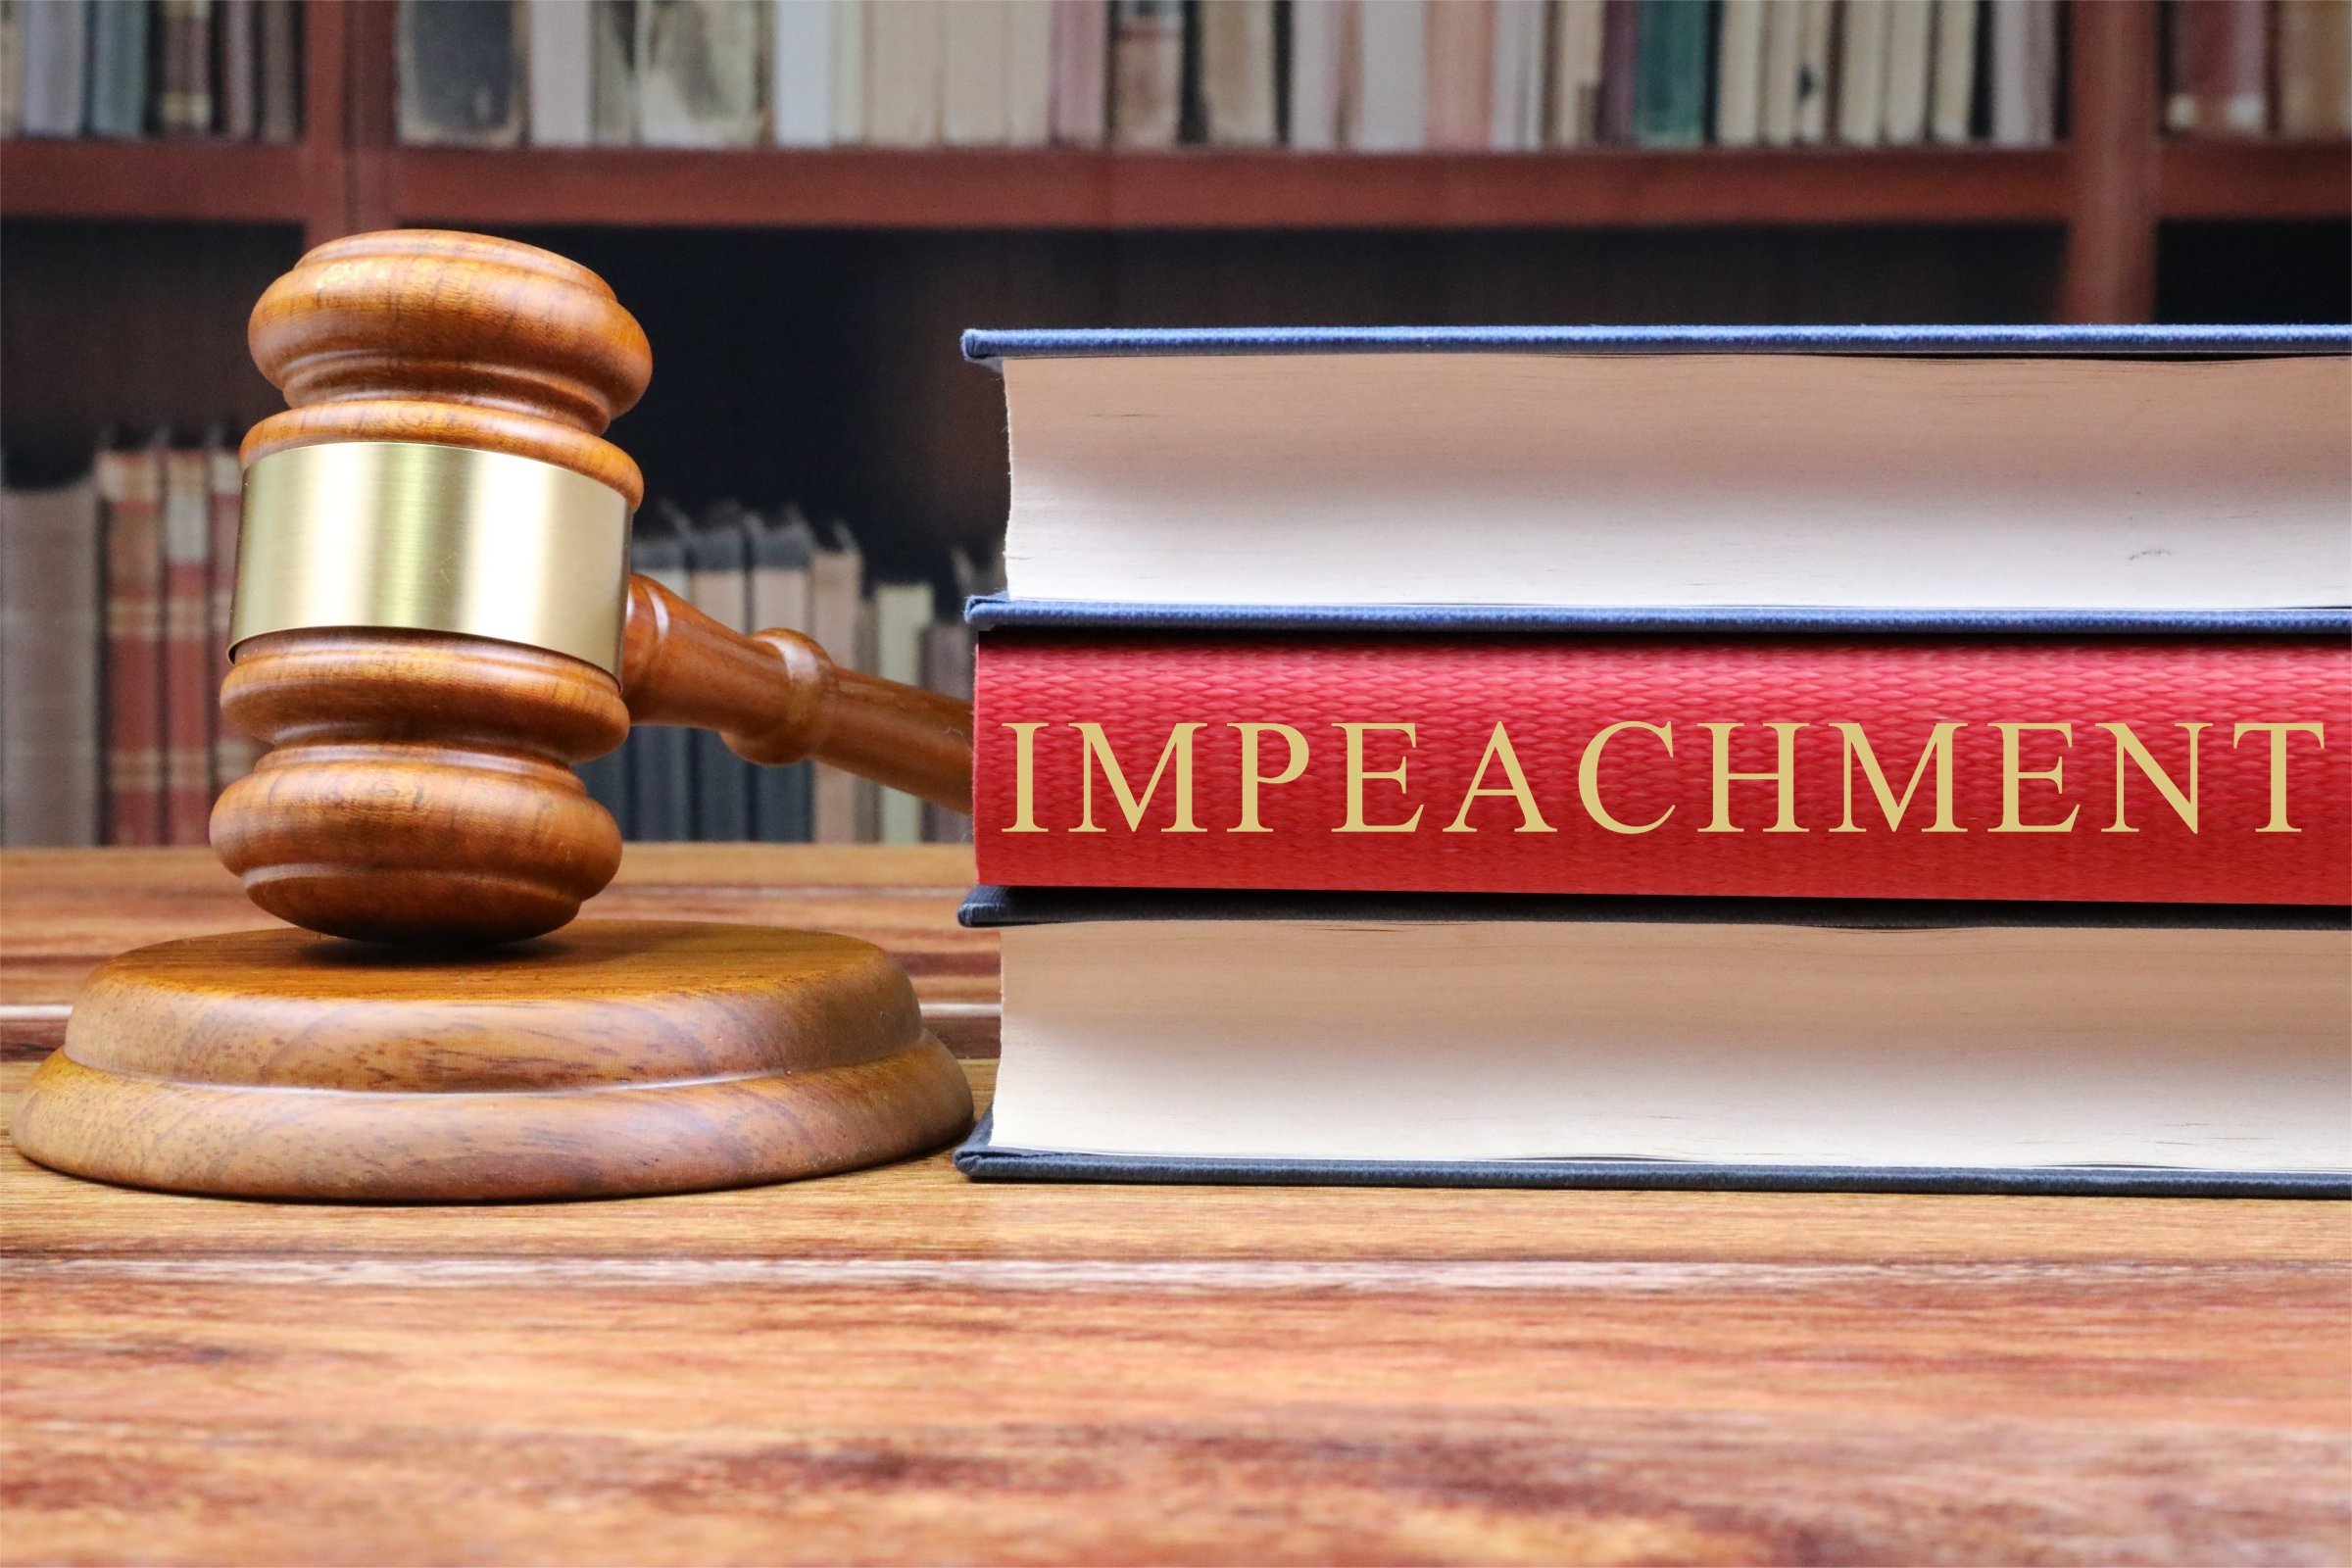 Impeachment Free of Charge Creative Commons Legal 8 image